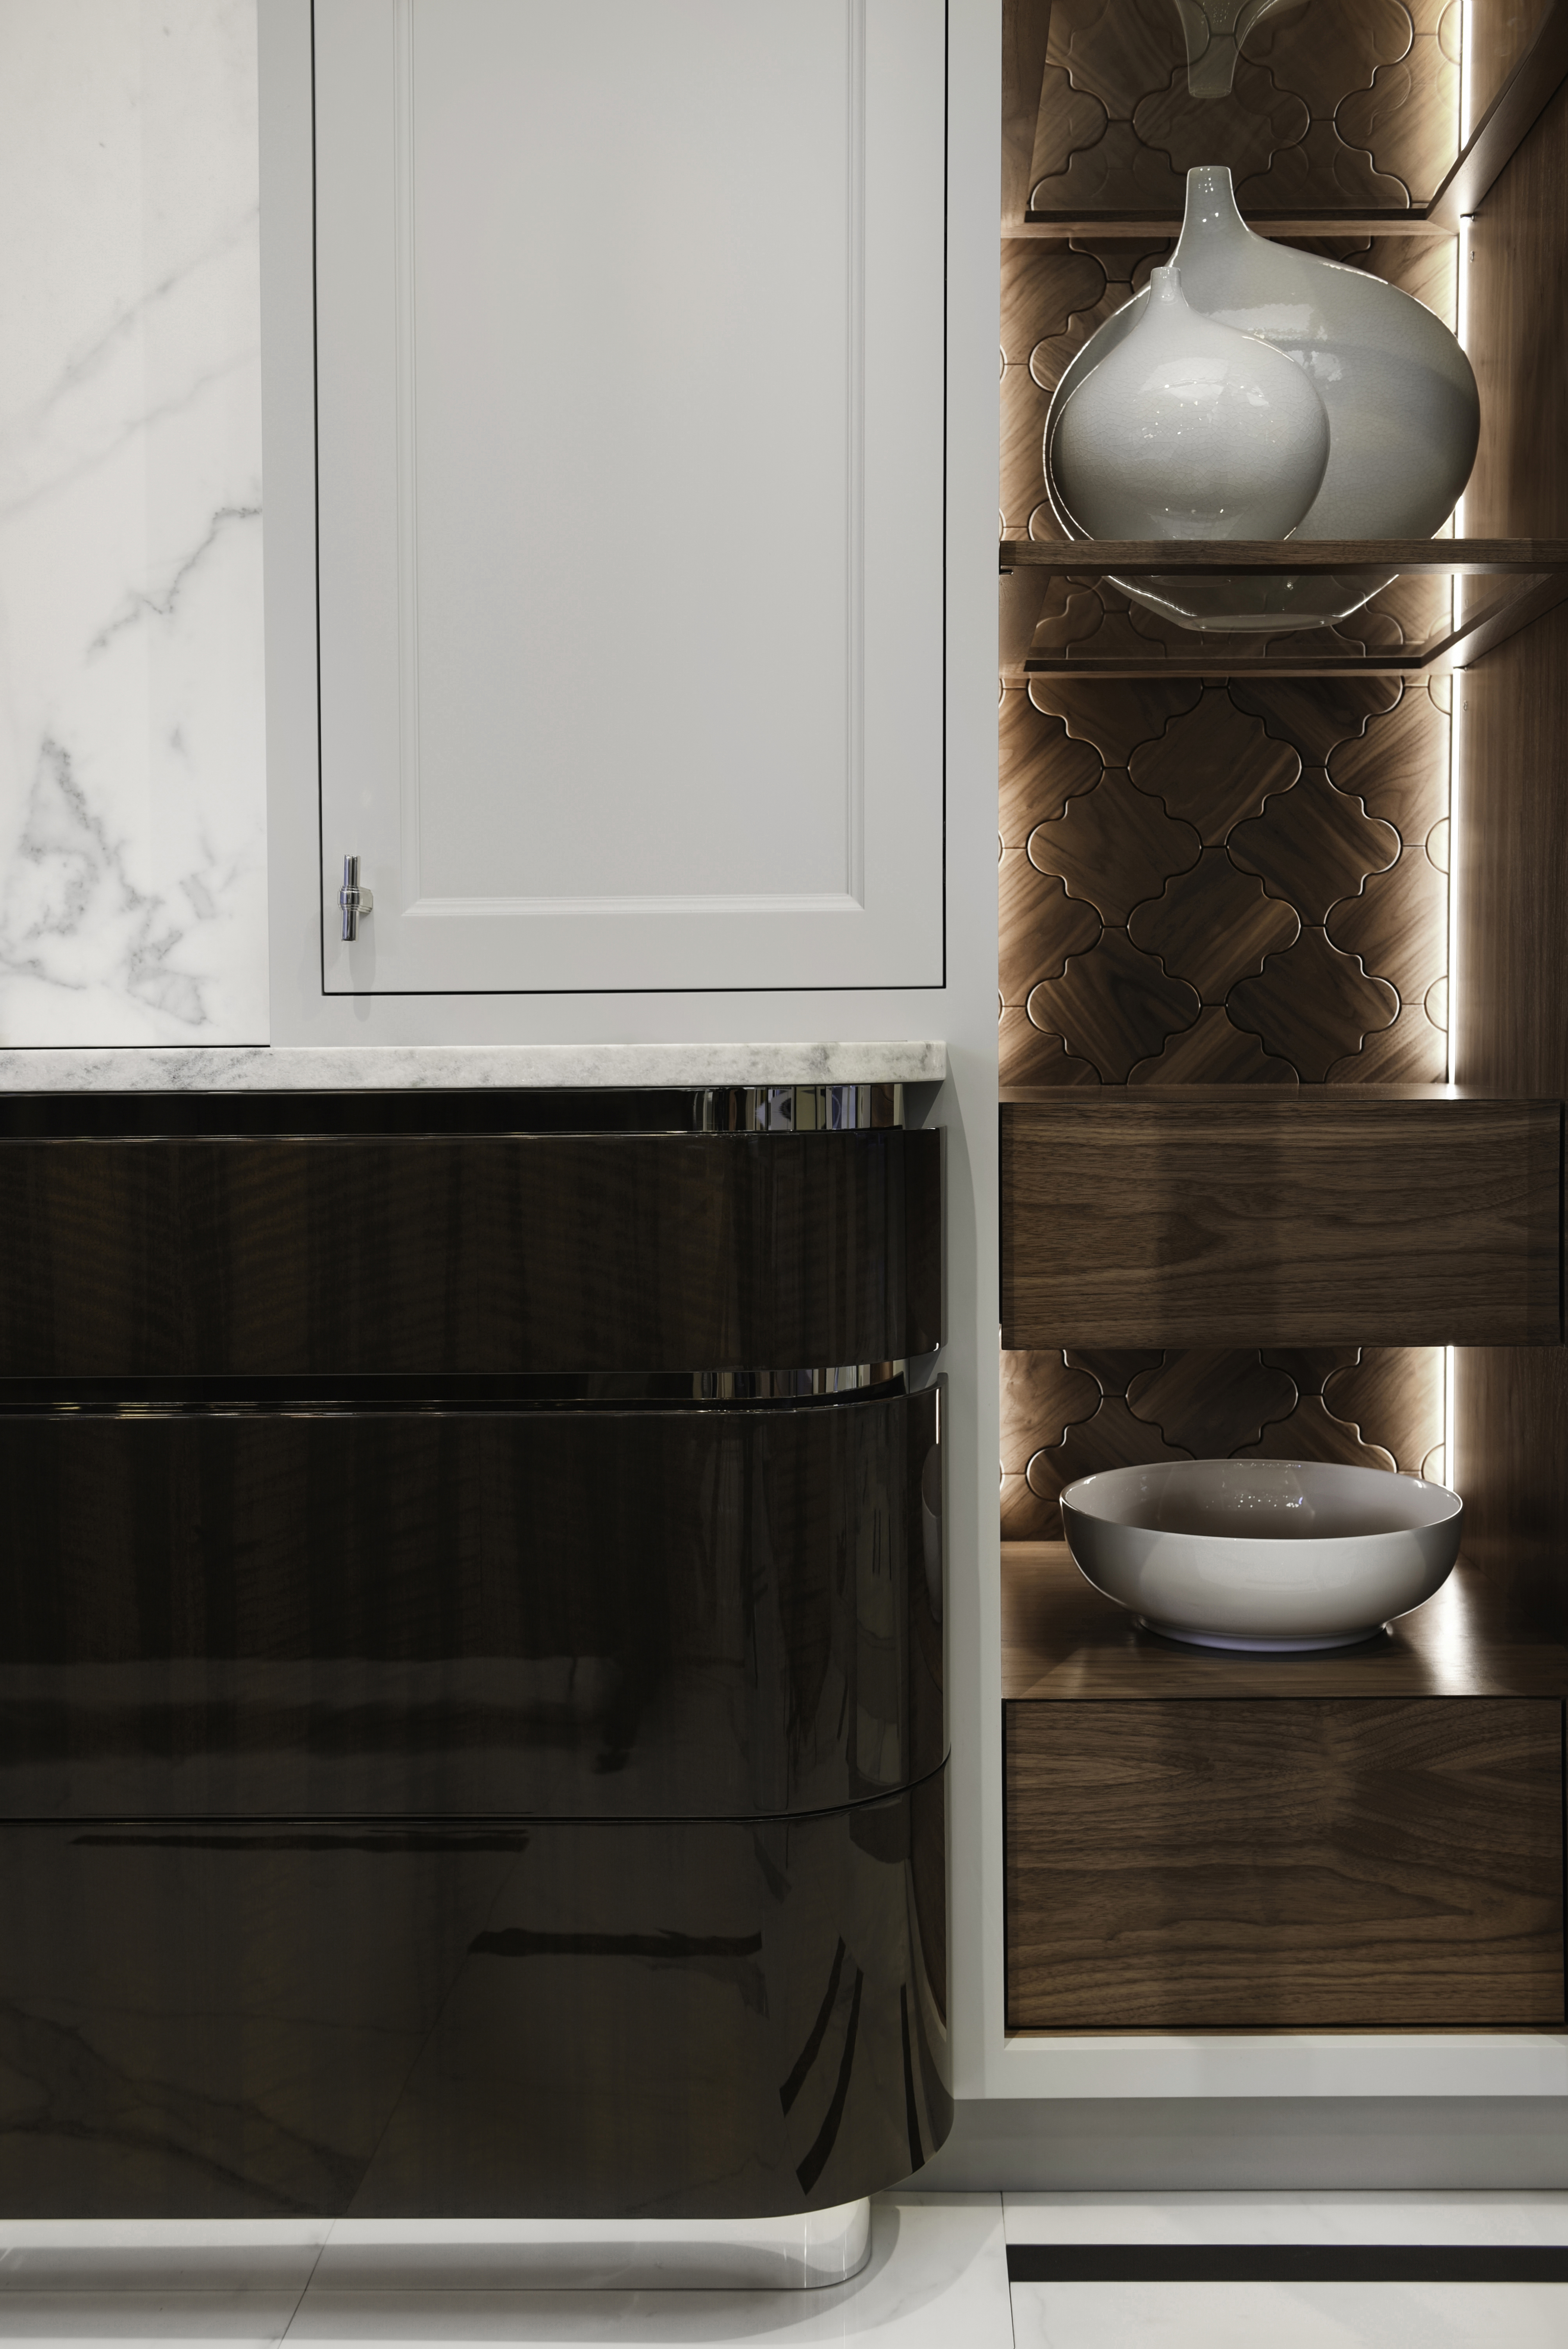 The juxtaposition of all the materials used in the kitchen emphasizes Dark Pearl's beauty, originality and uniqueness.